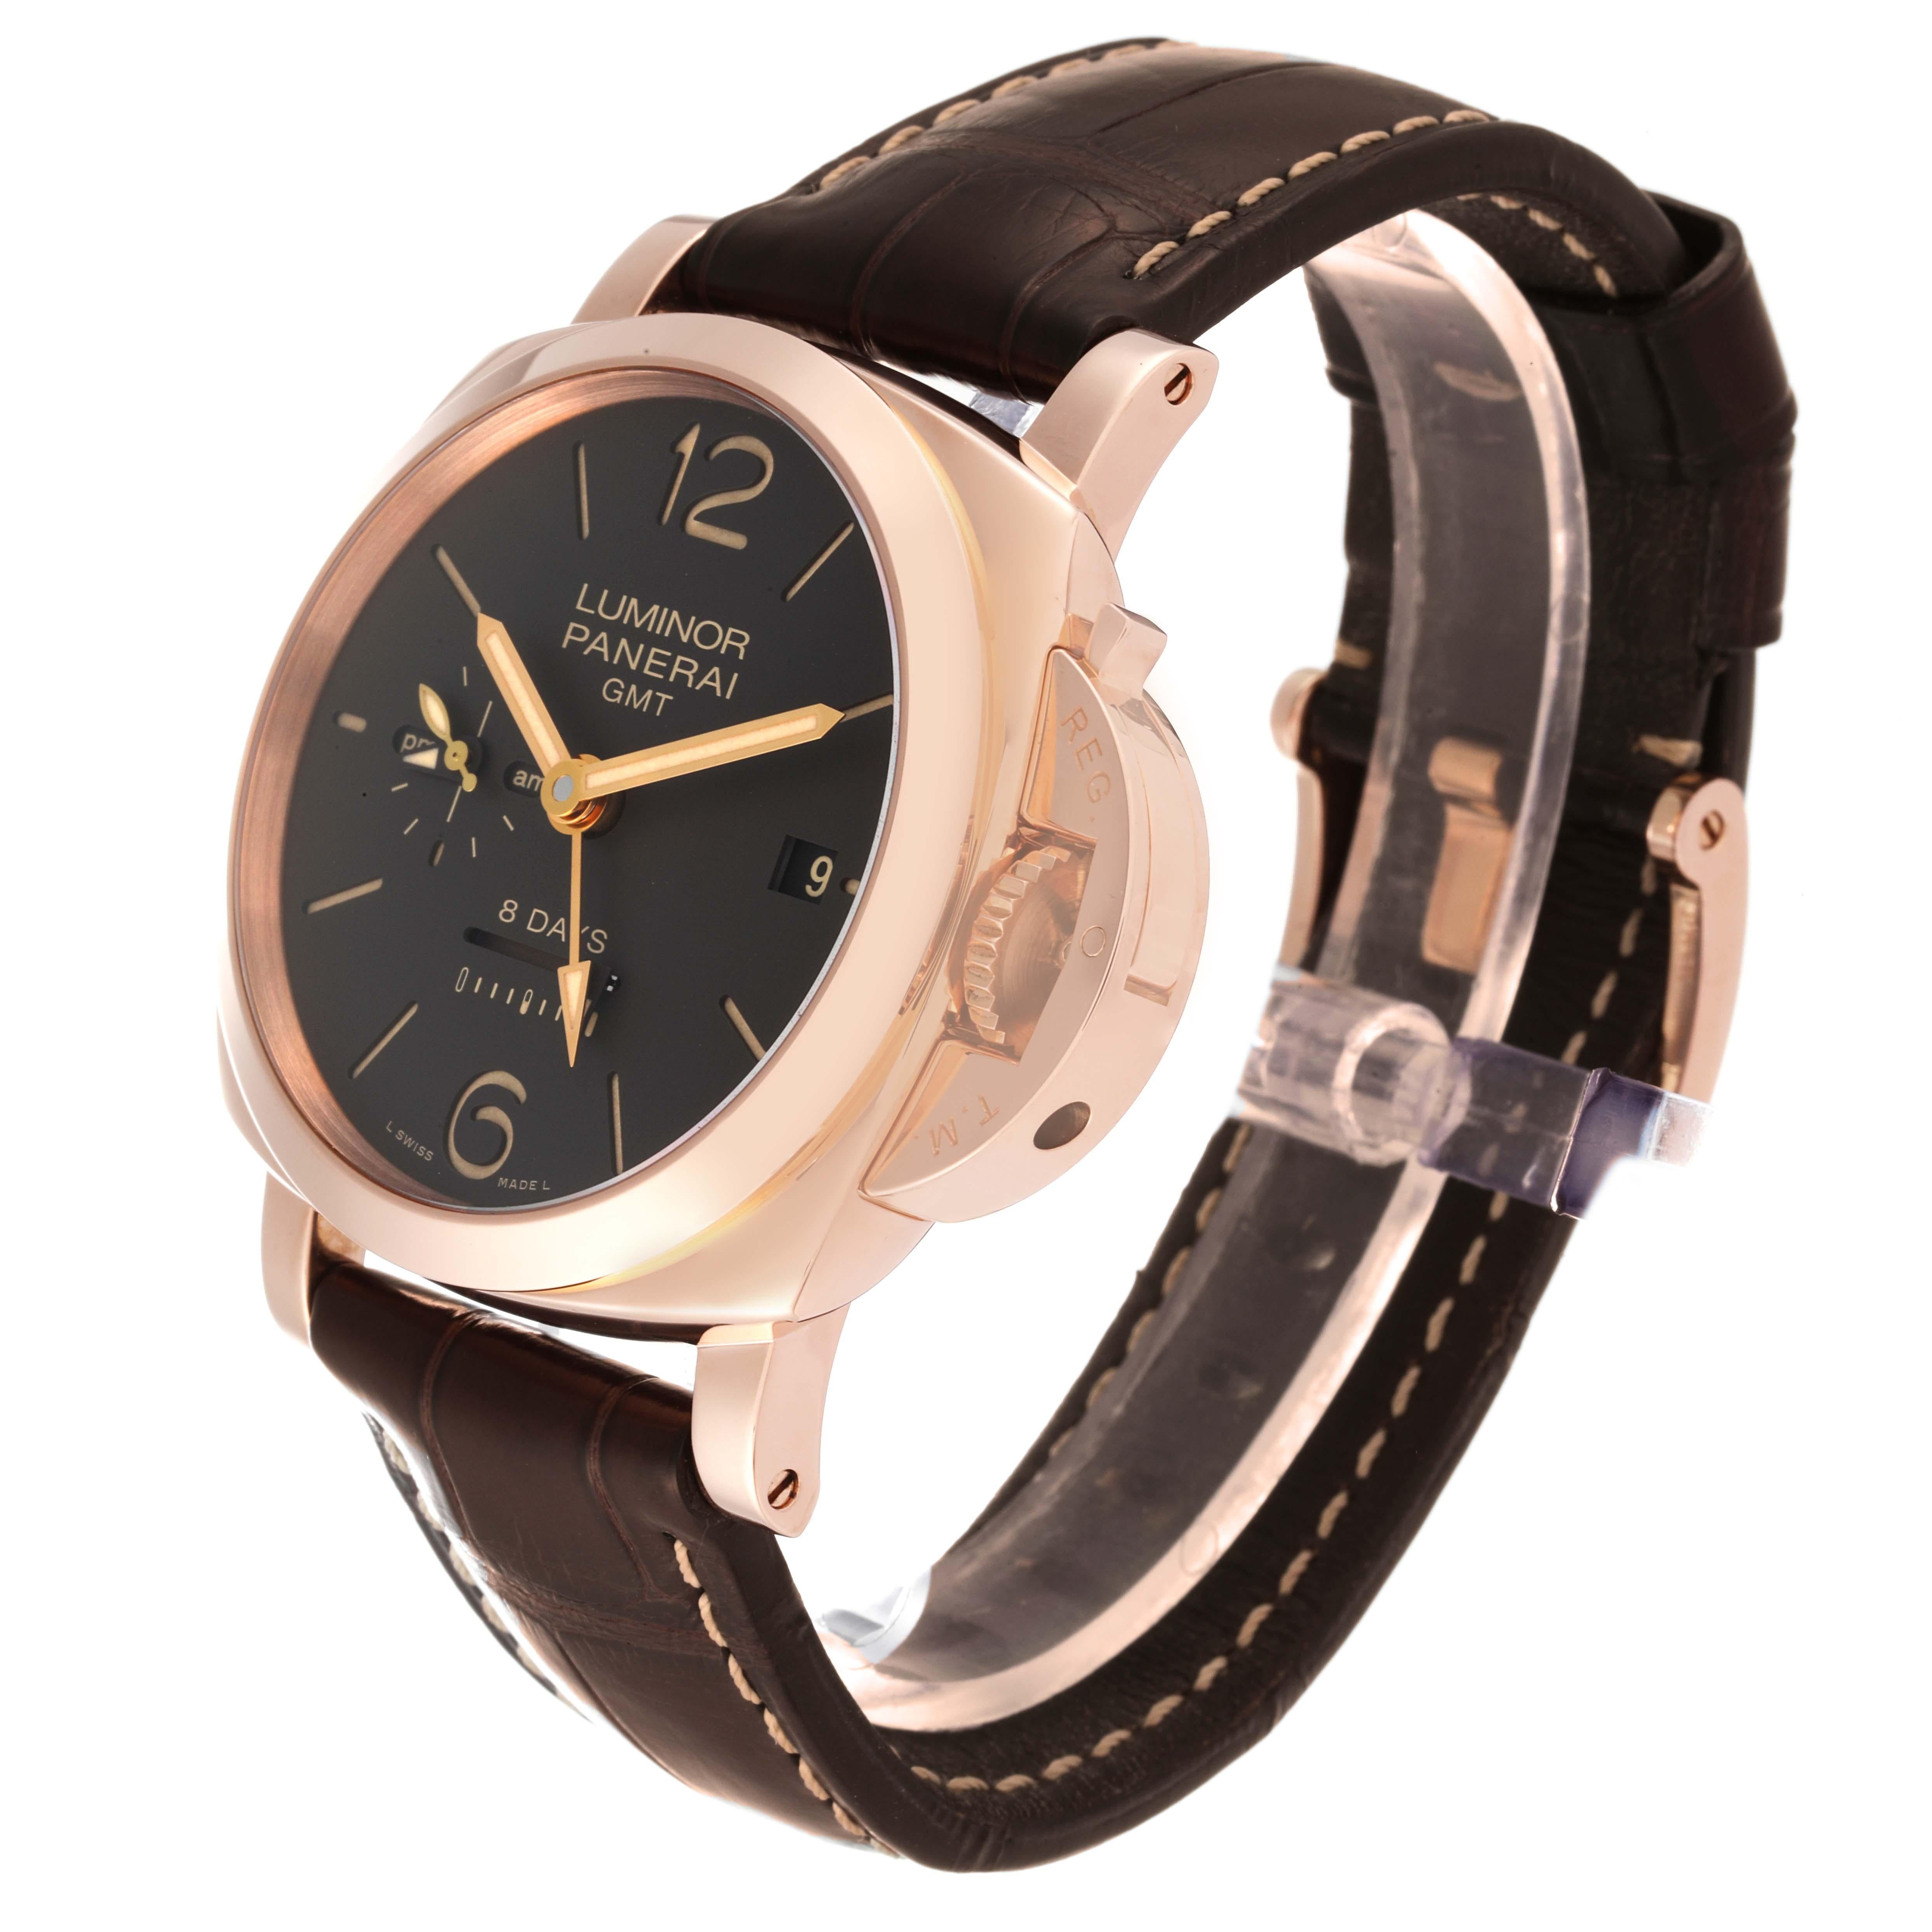 Panerai Luminor 1950 8 Days GMT Rose Gold Mens Watch PAM00576 Papers In Excellent Condition For Sale In Atlanta, GA